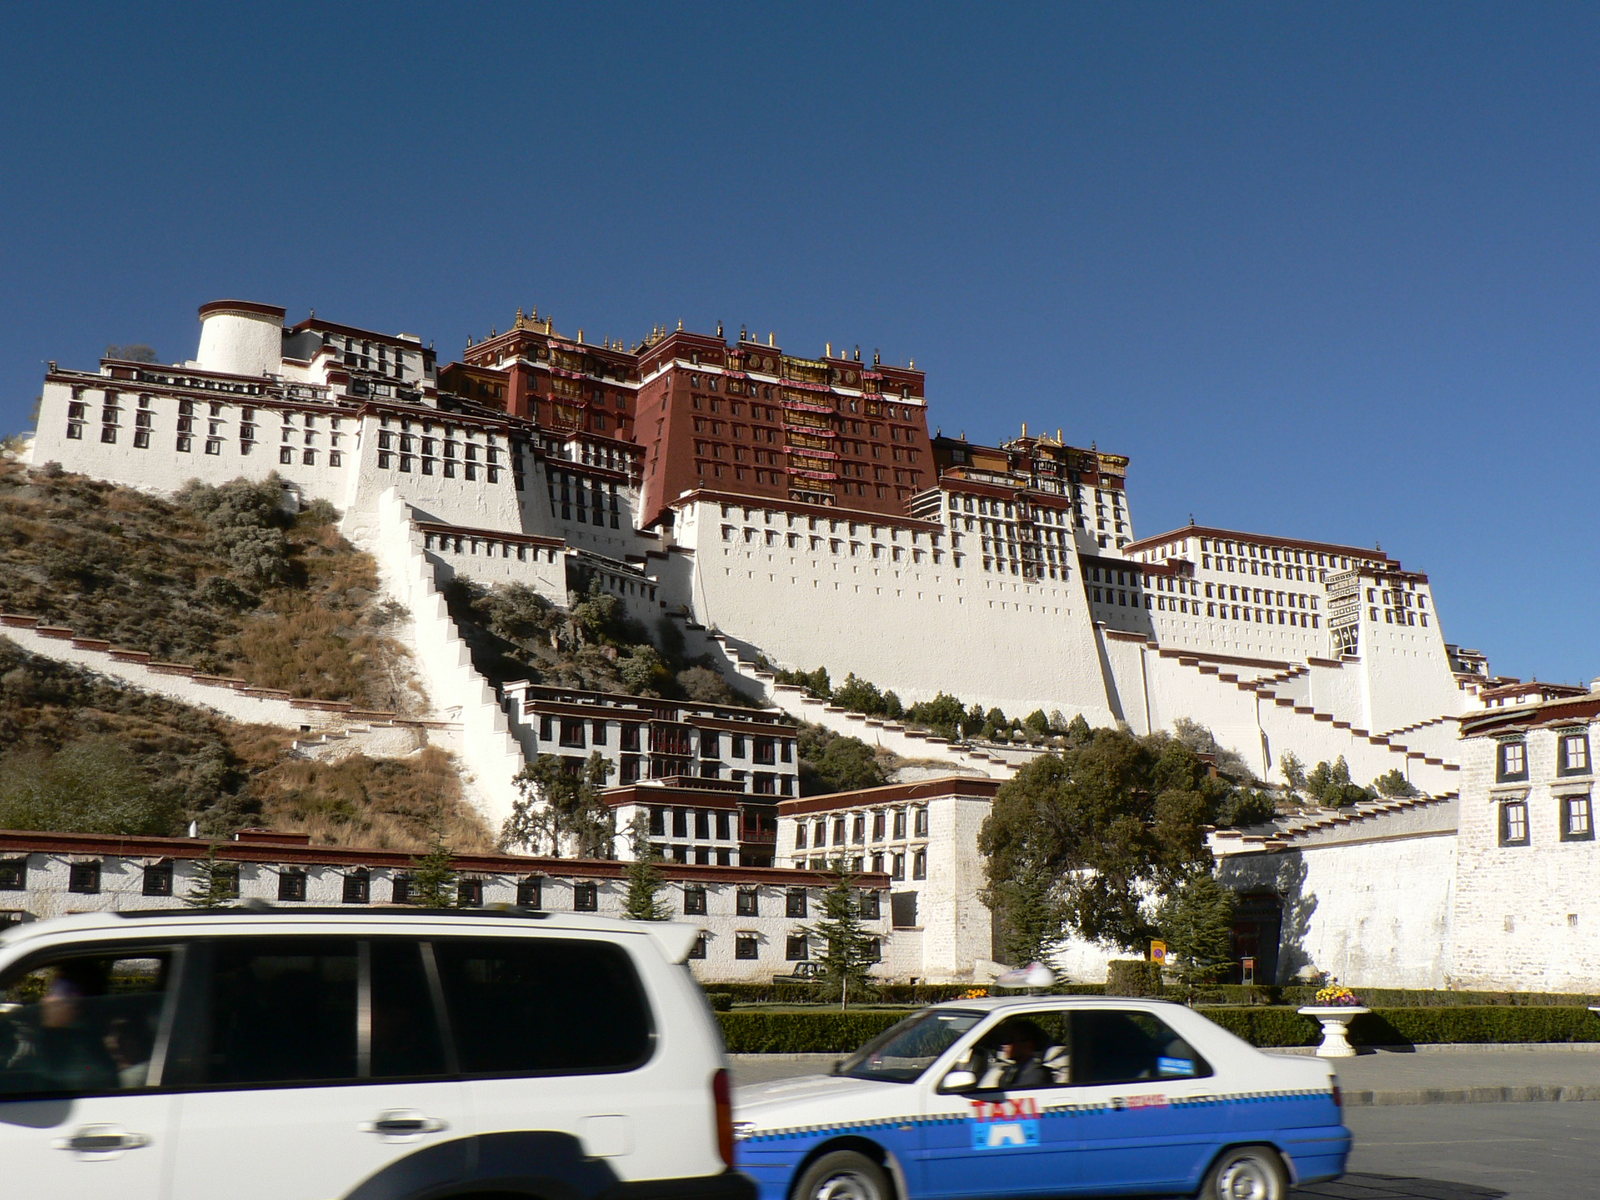 Potala from the front